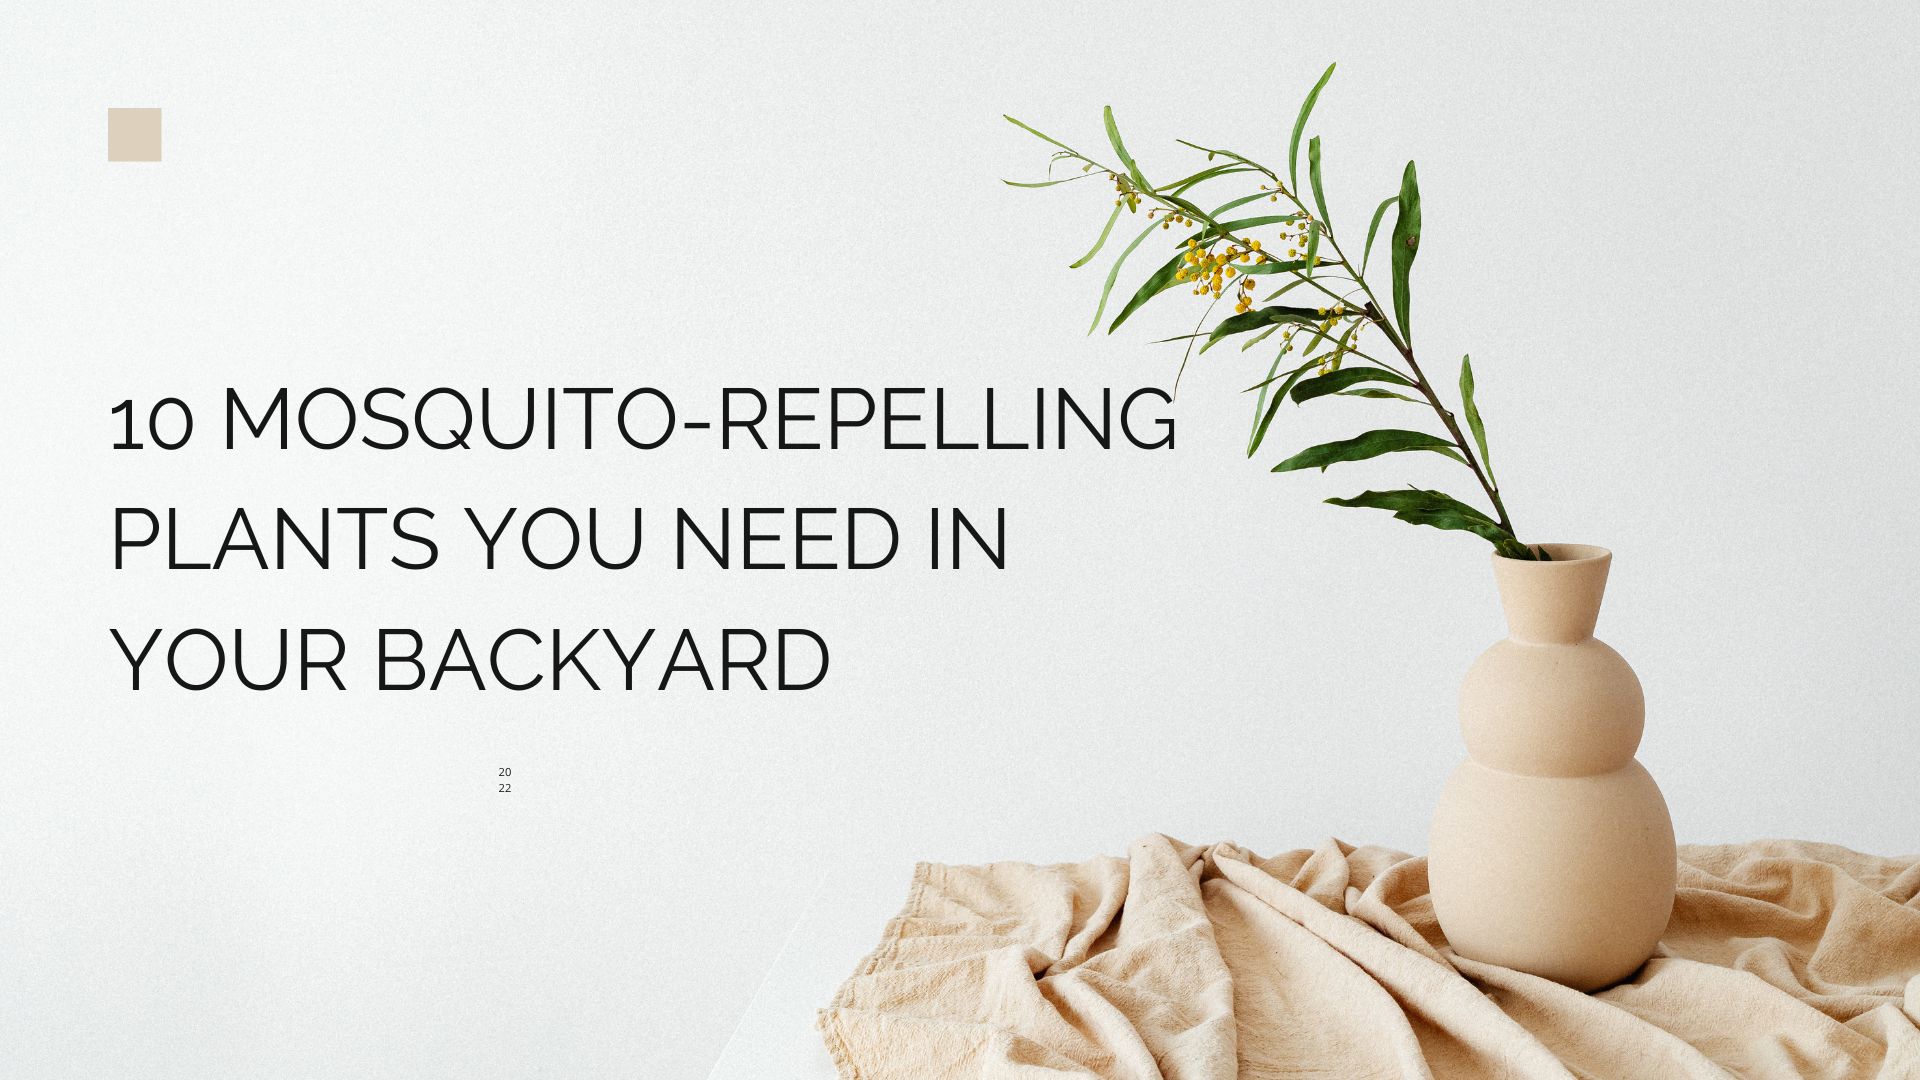 10 Mosquito-Repelling Plants You Need in Your Backyard